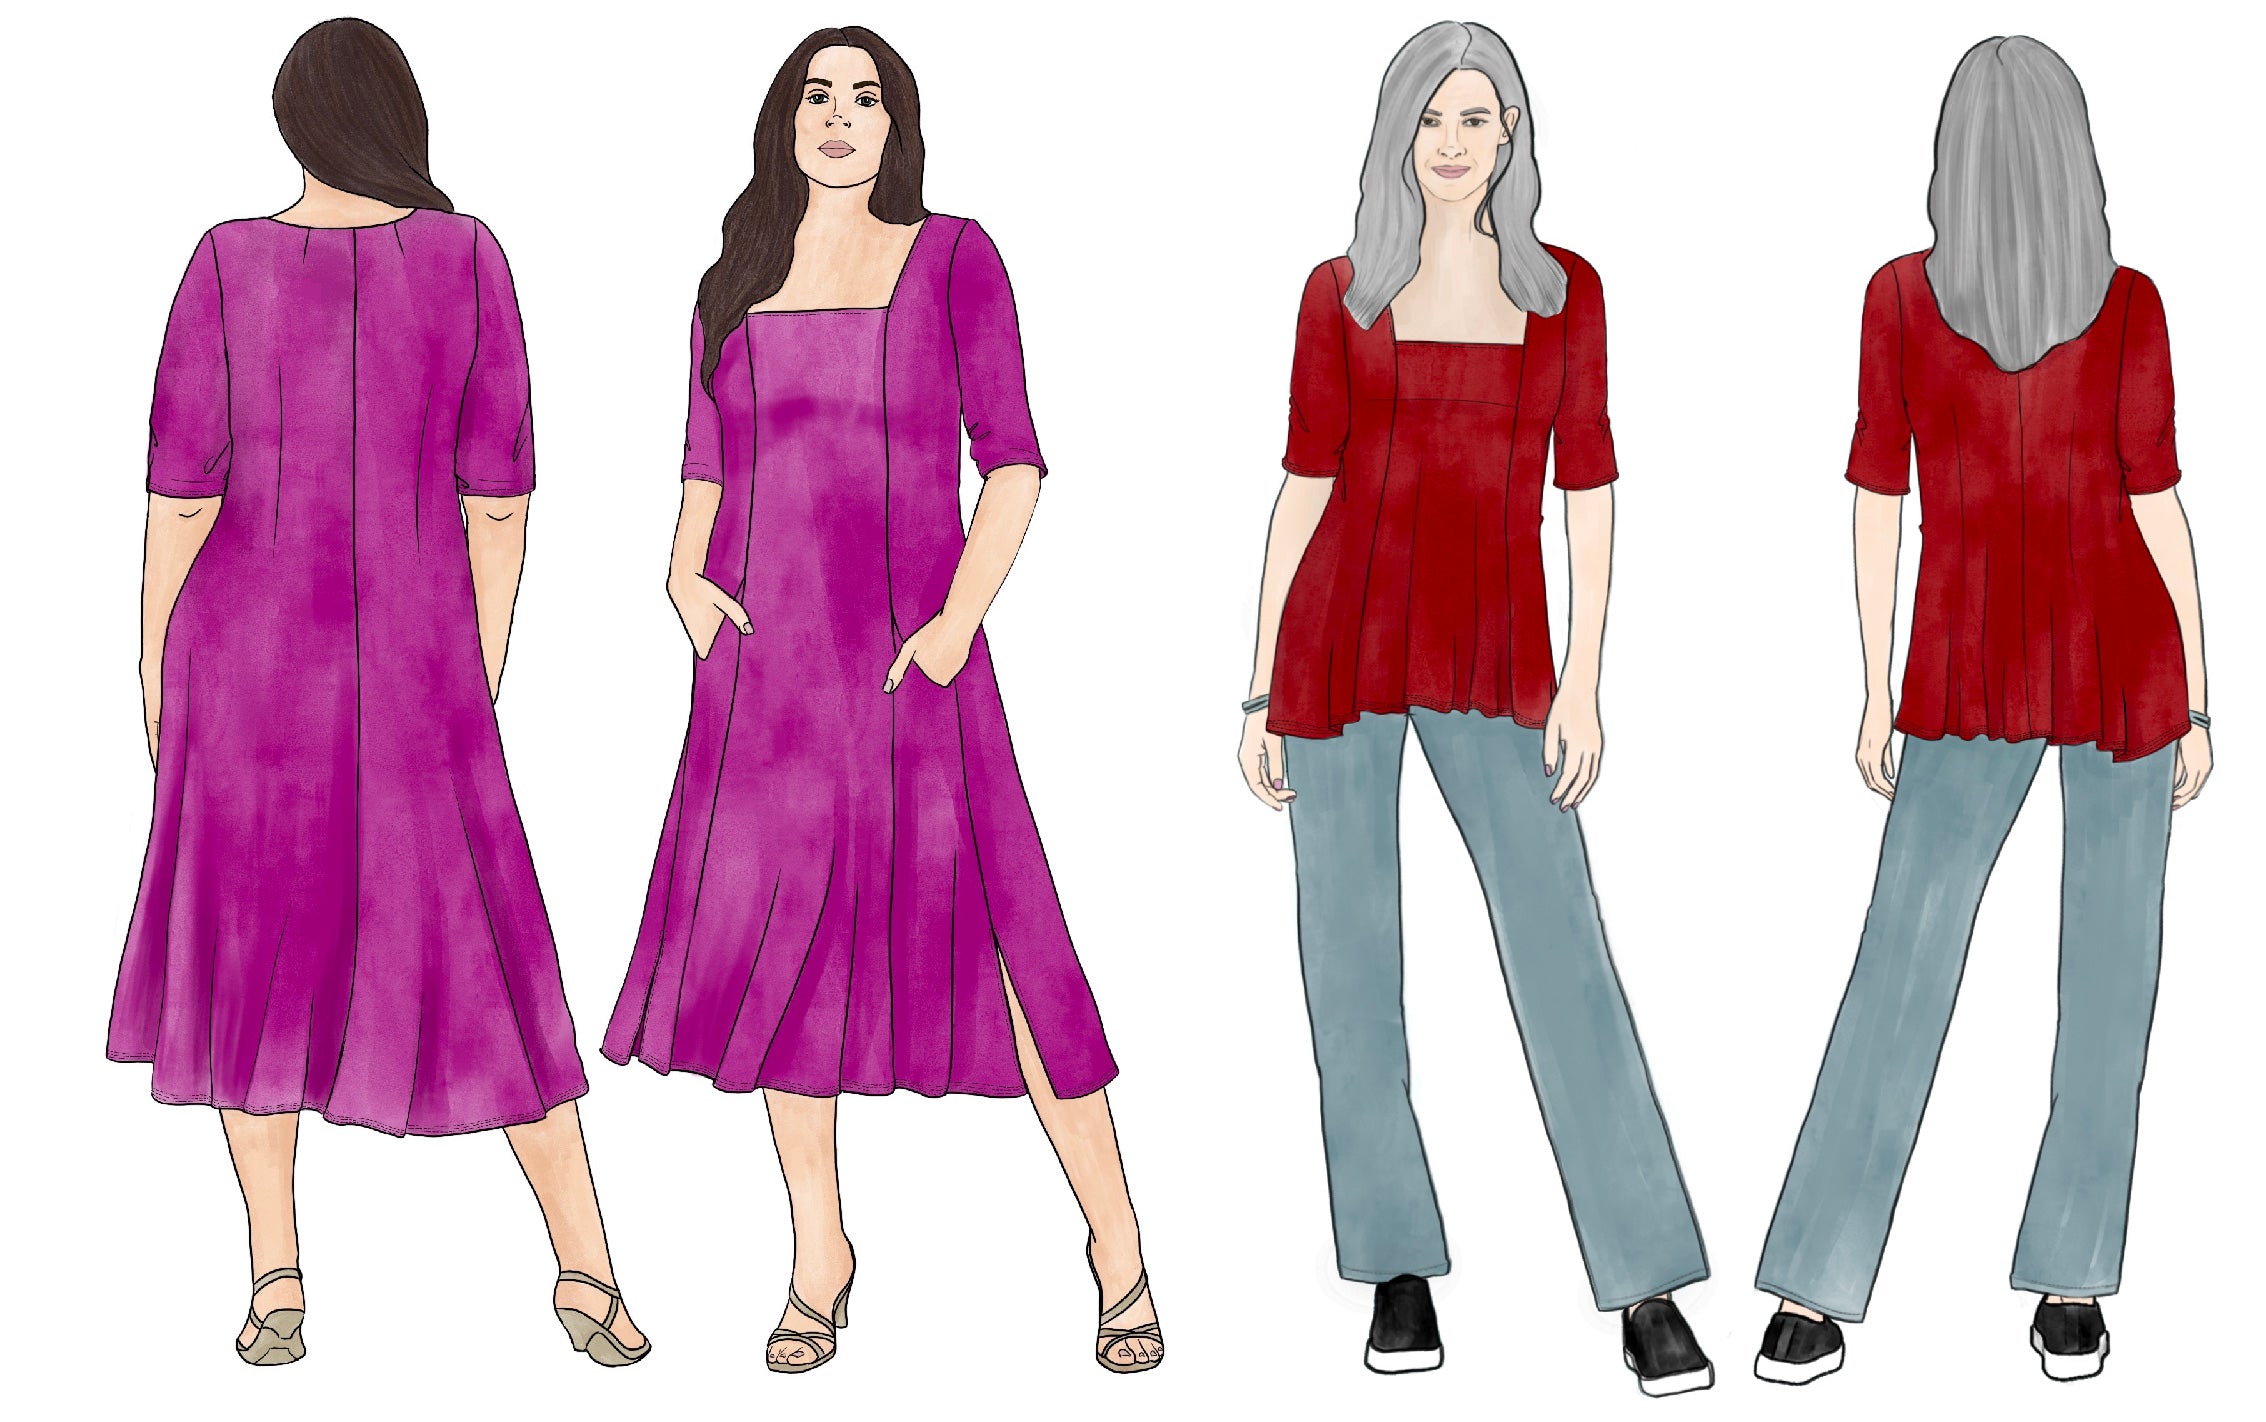 Fashion illustrations of a dress and top. Both garments have square necklines, elbow-length sleeves and back darts. The dress, on a brown-haired model, has slouchy pockets and a split hem that falls below the knee. The model styled the pink dress with strappy sandals. The top, on a model with gray hair, has a slight handkerchief hem at the low hip. The model styled the top with jeans and sneakers.